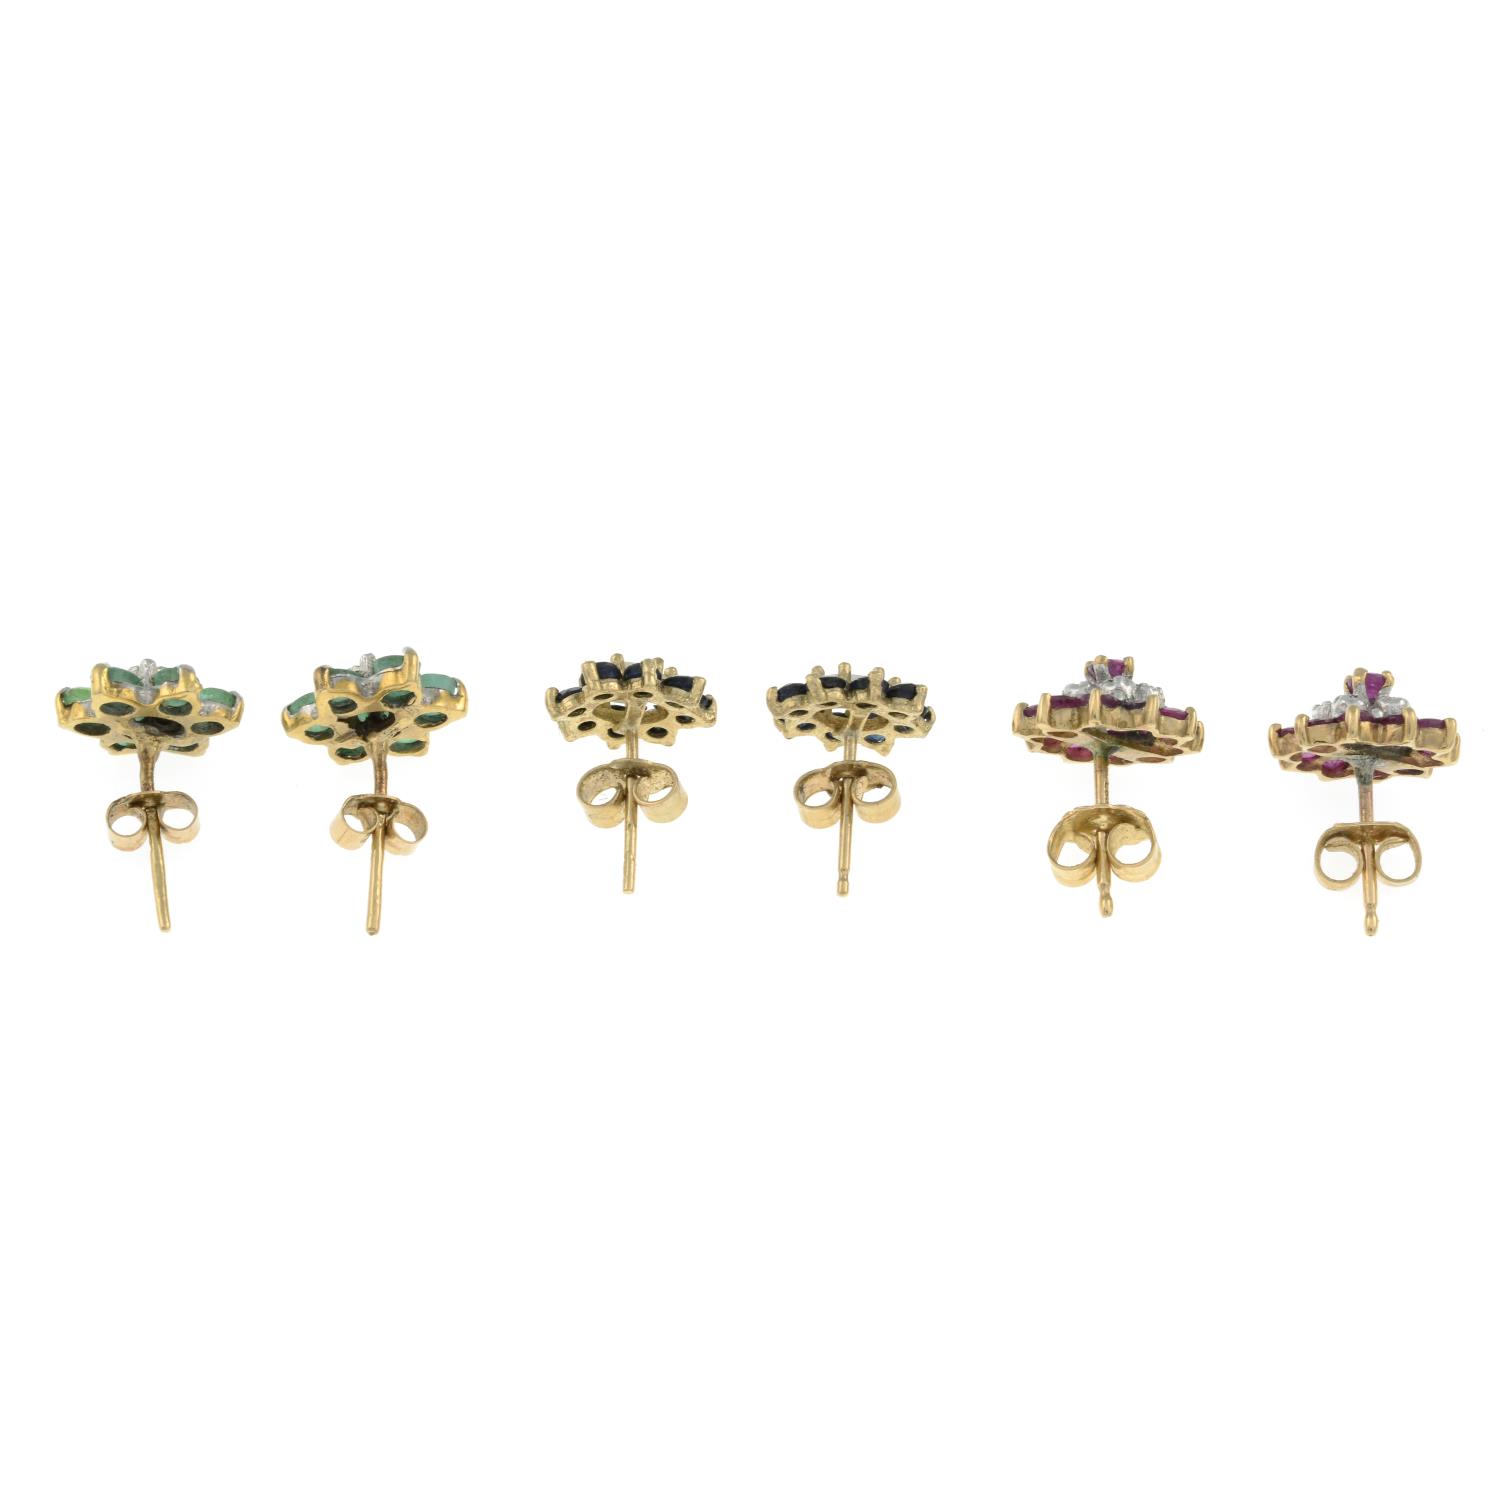 Three pairs of 9ct gold gem-set earrings.Hallmarks for 9ct gold.Lengths 1.4 to 1.6cms. - Image 2 of 2